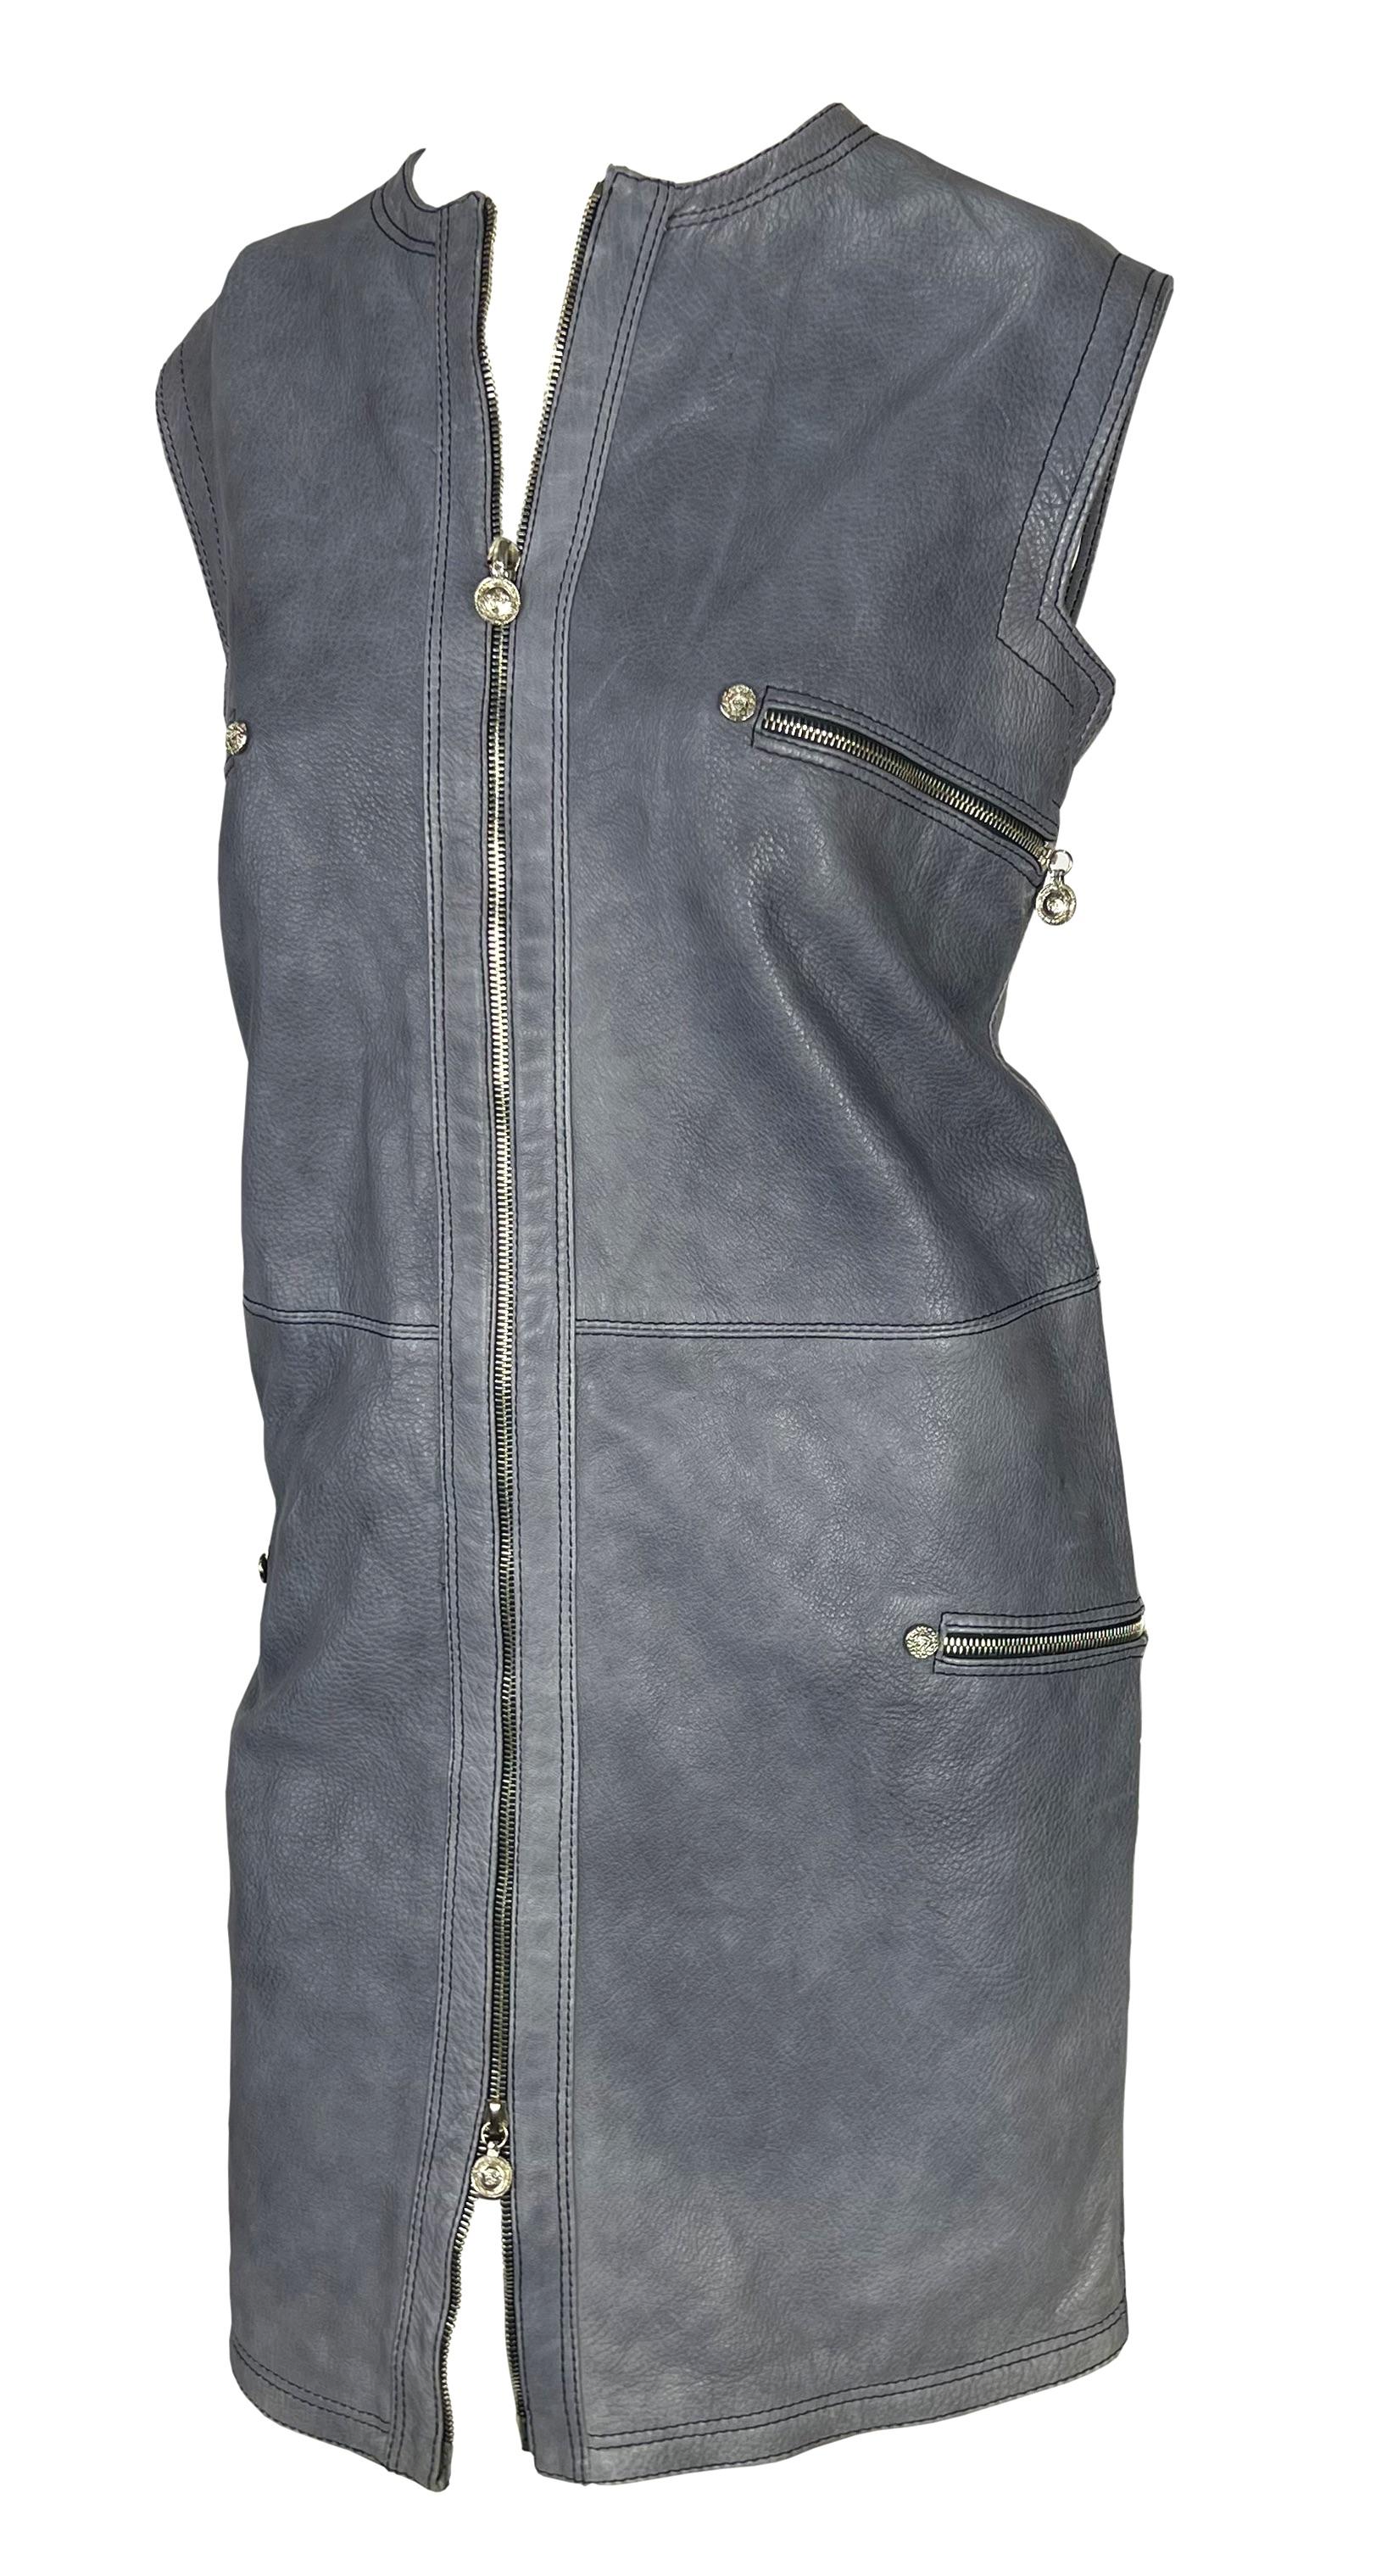 Presenting a beautiful grey leather Gianni Versace shift dress, designed by Gianni Versace. From 1996, this fabulous dress is constructed entirely of leather. The sleeveless dress features a crew neckline, zippers at the bust and hips, and a zipper